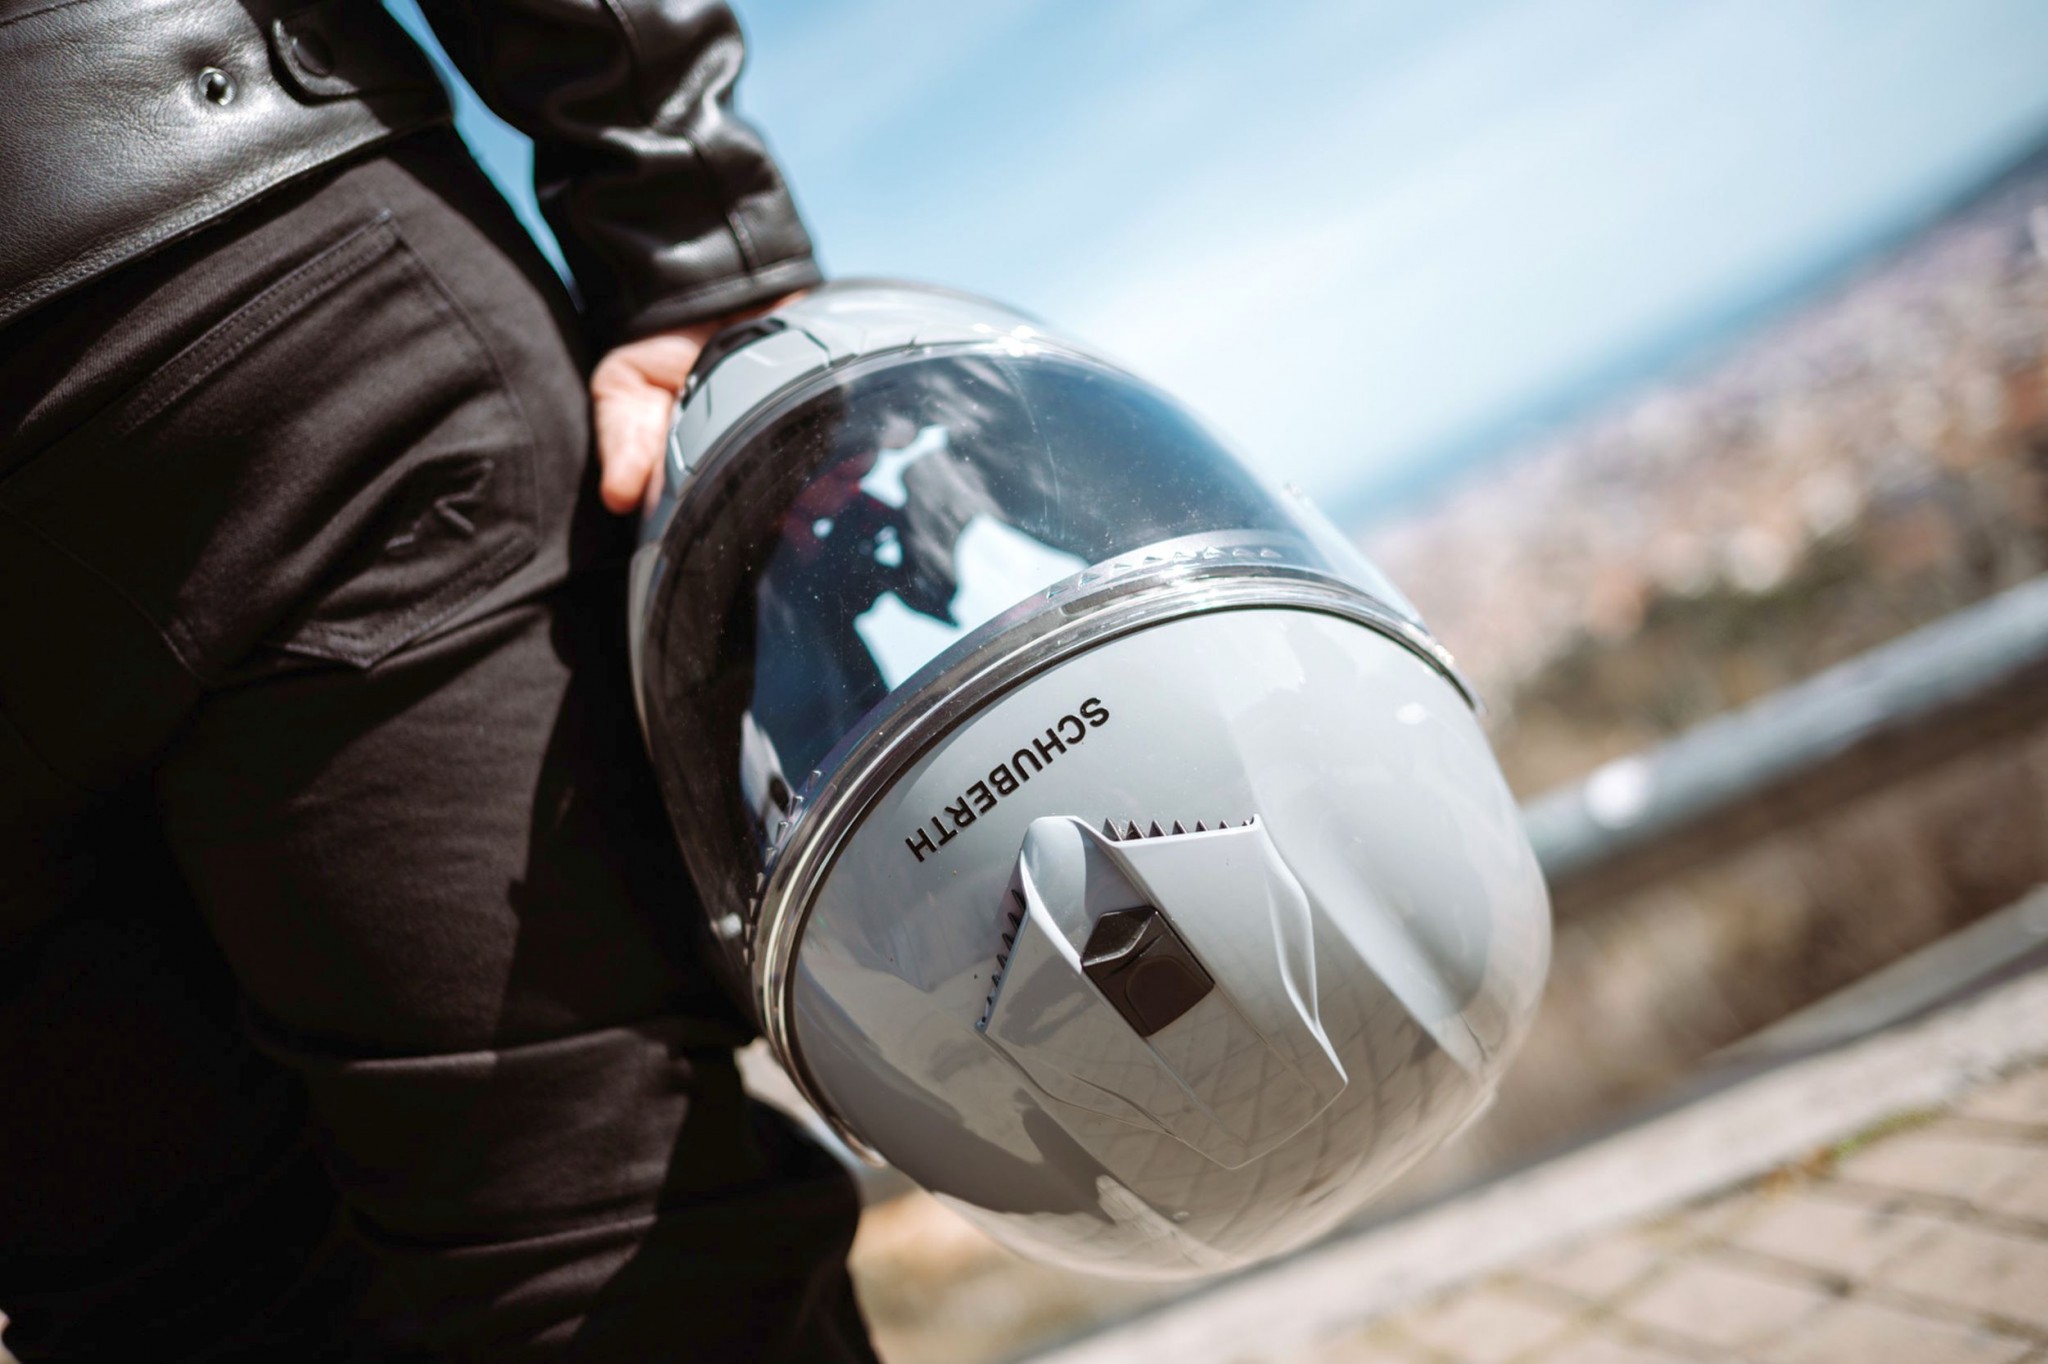 Schuberth S3 sport touring helmet in the test - Image 55